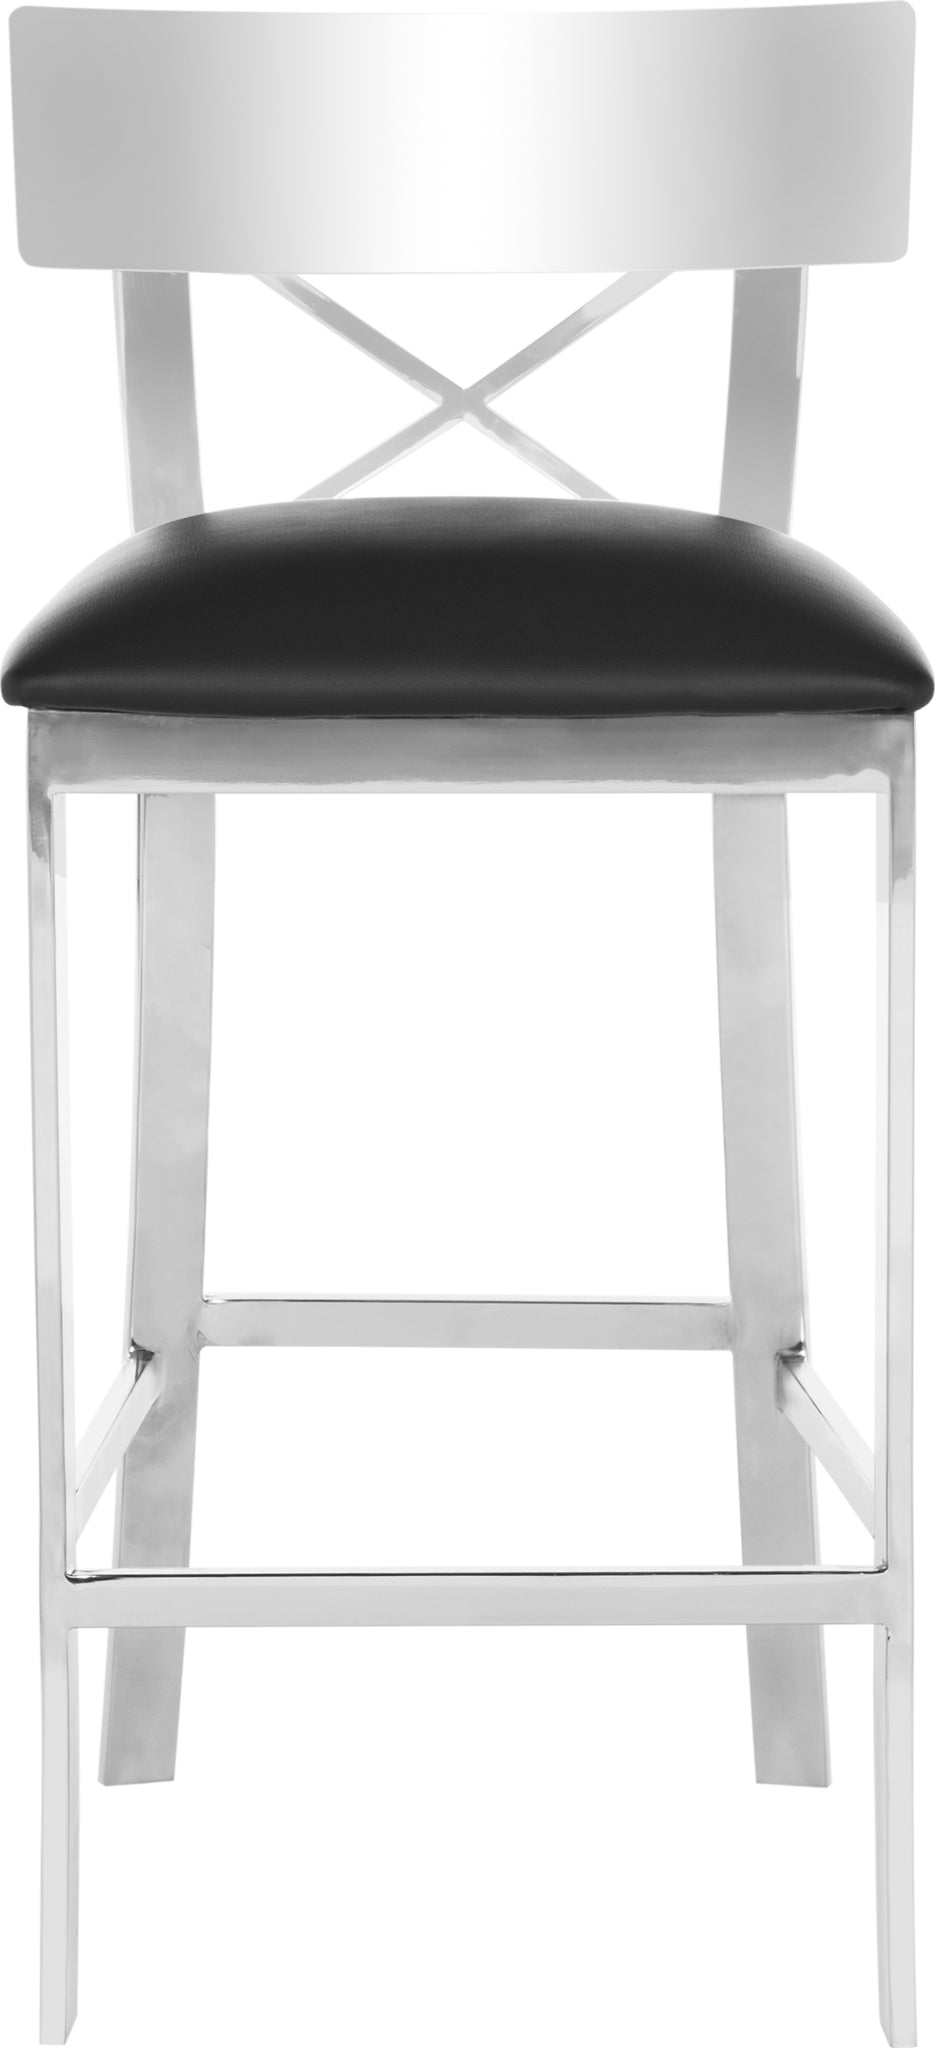 Safavieh Zoey 35''H Stainless Steel Cross Back Counter Stool Black and Chrome Furniture main image